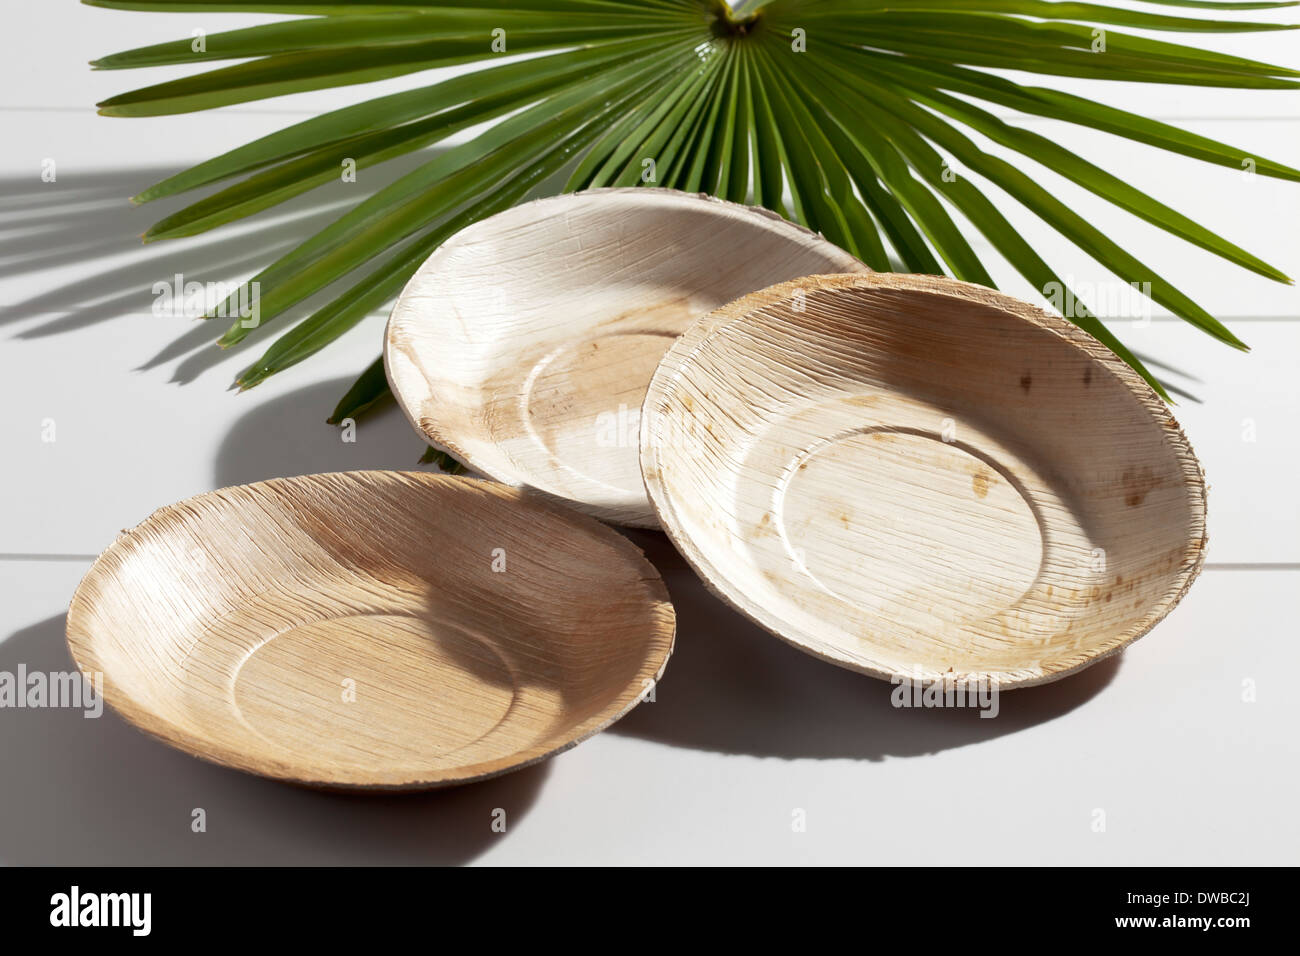 Palm leaf plates and palm frond, studio shot Stock Photo